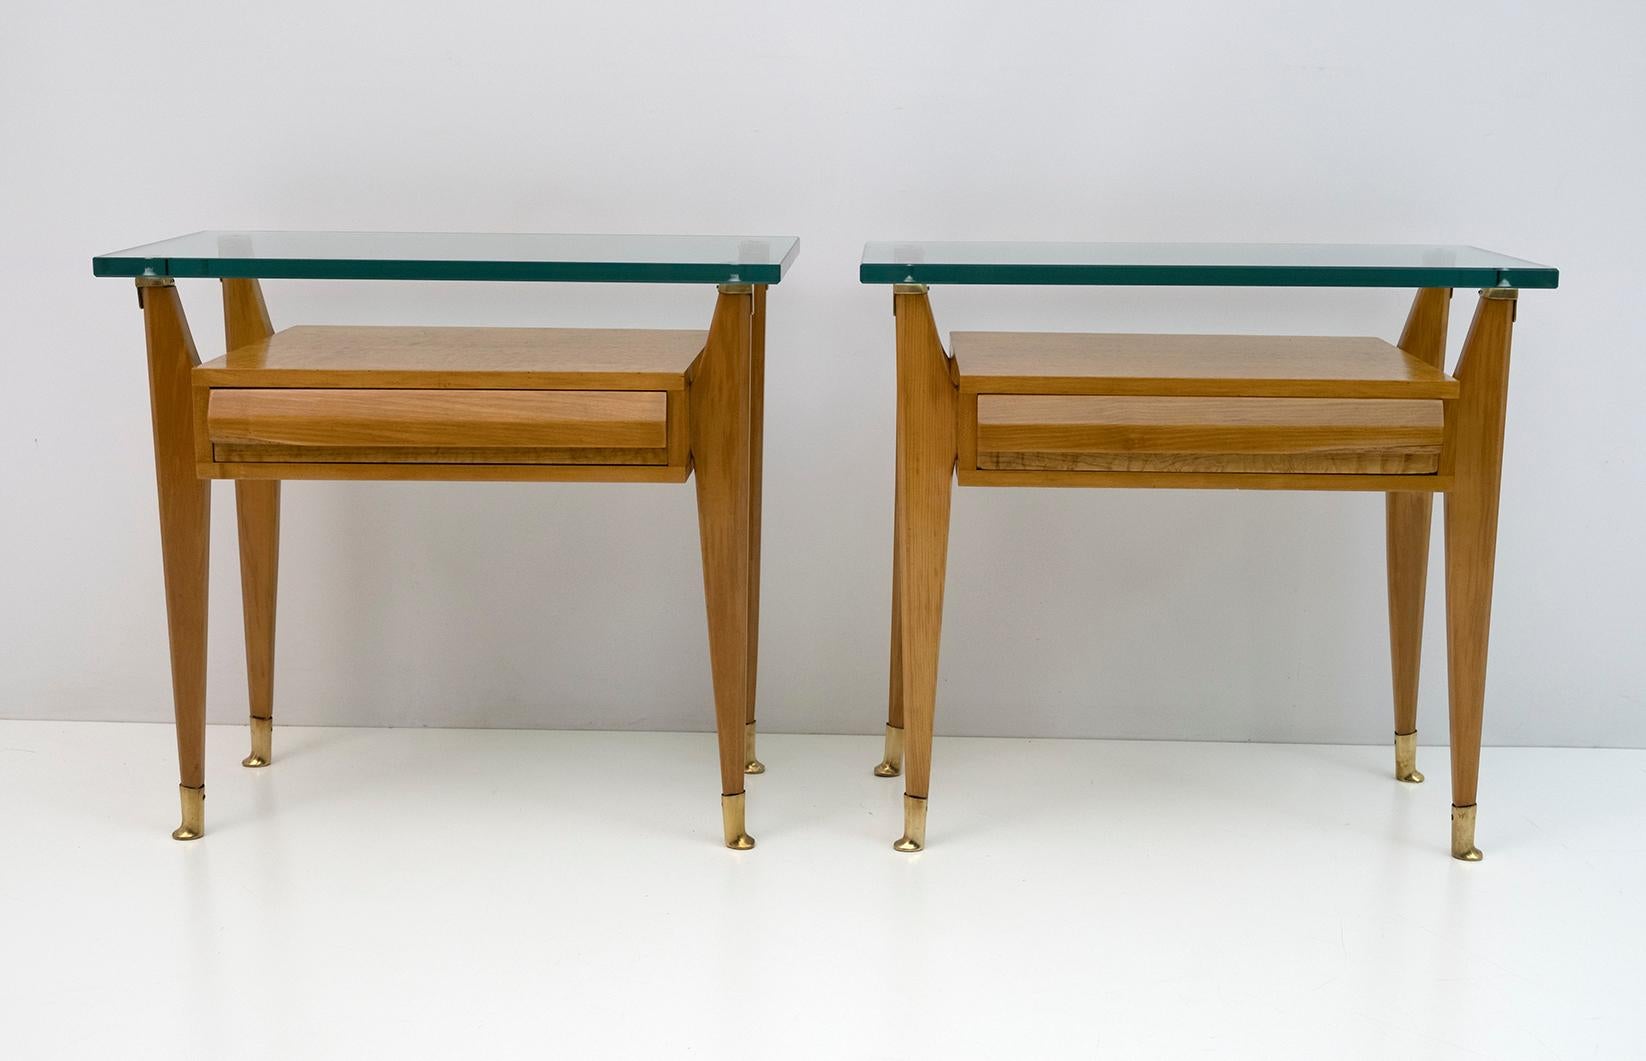 Pair of Italian bedside tables designed by Vittorio Dassi in the 1950s, in birch and birch root, thick glass top and brass feet. The bedside tables have been restored and polished with shellac.